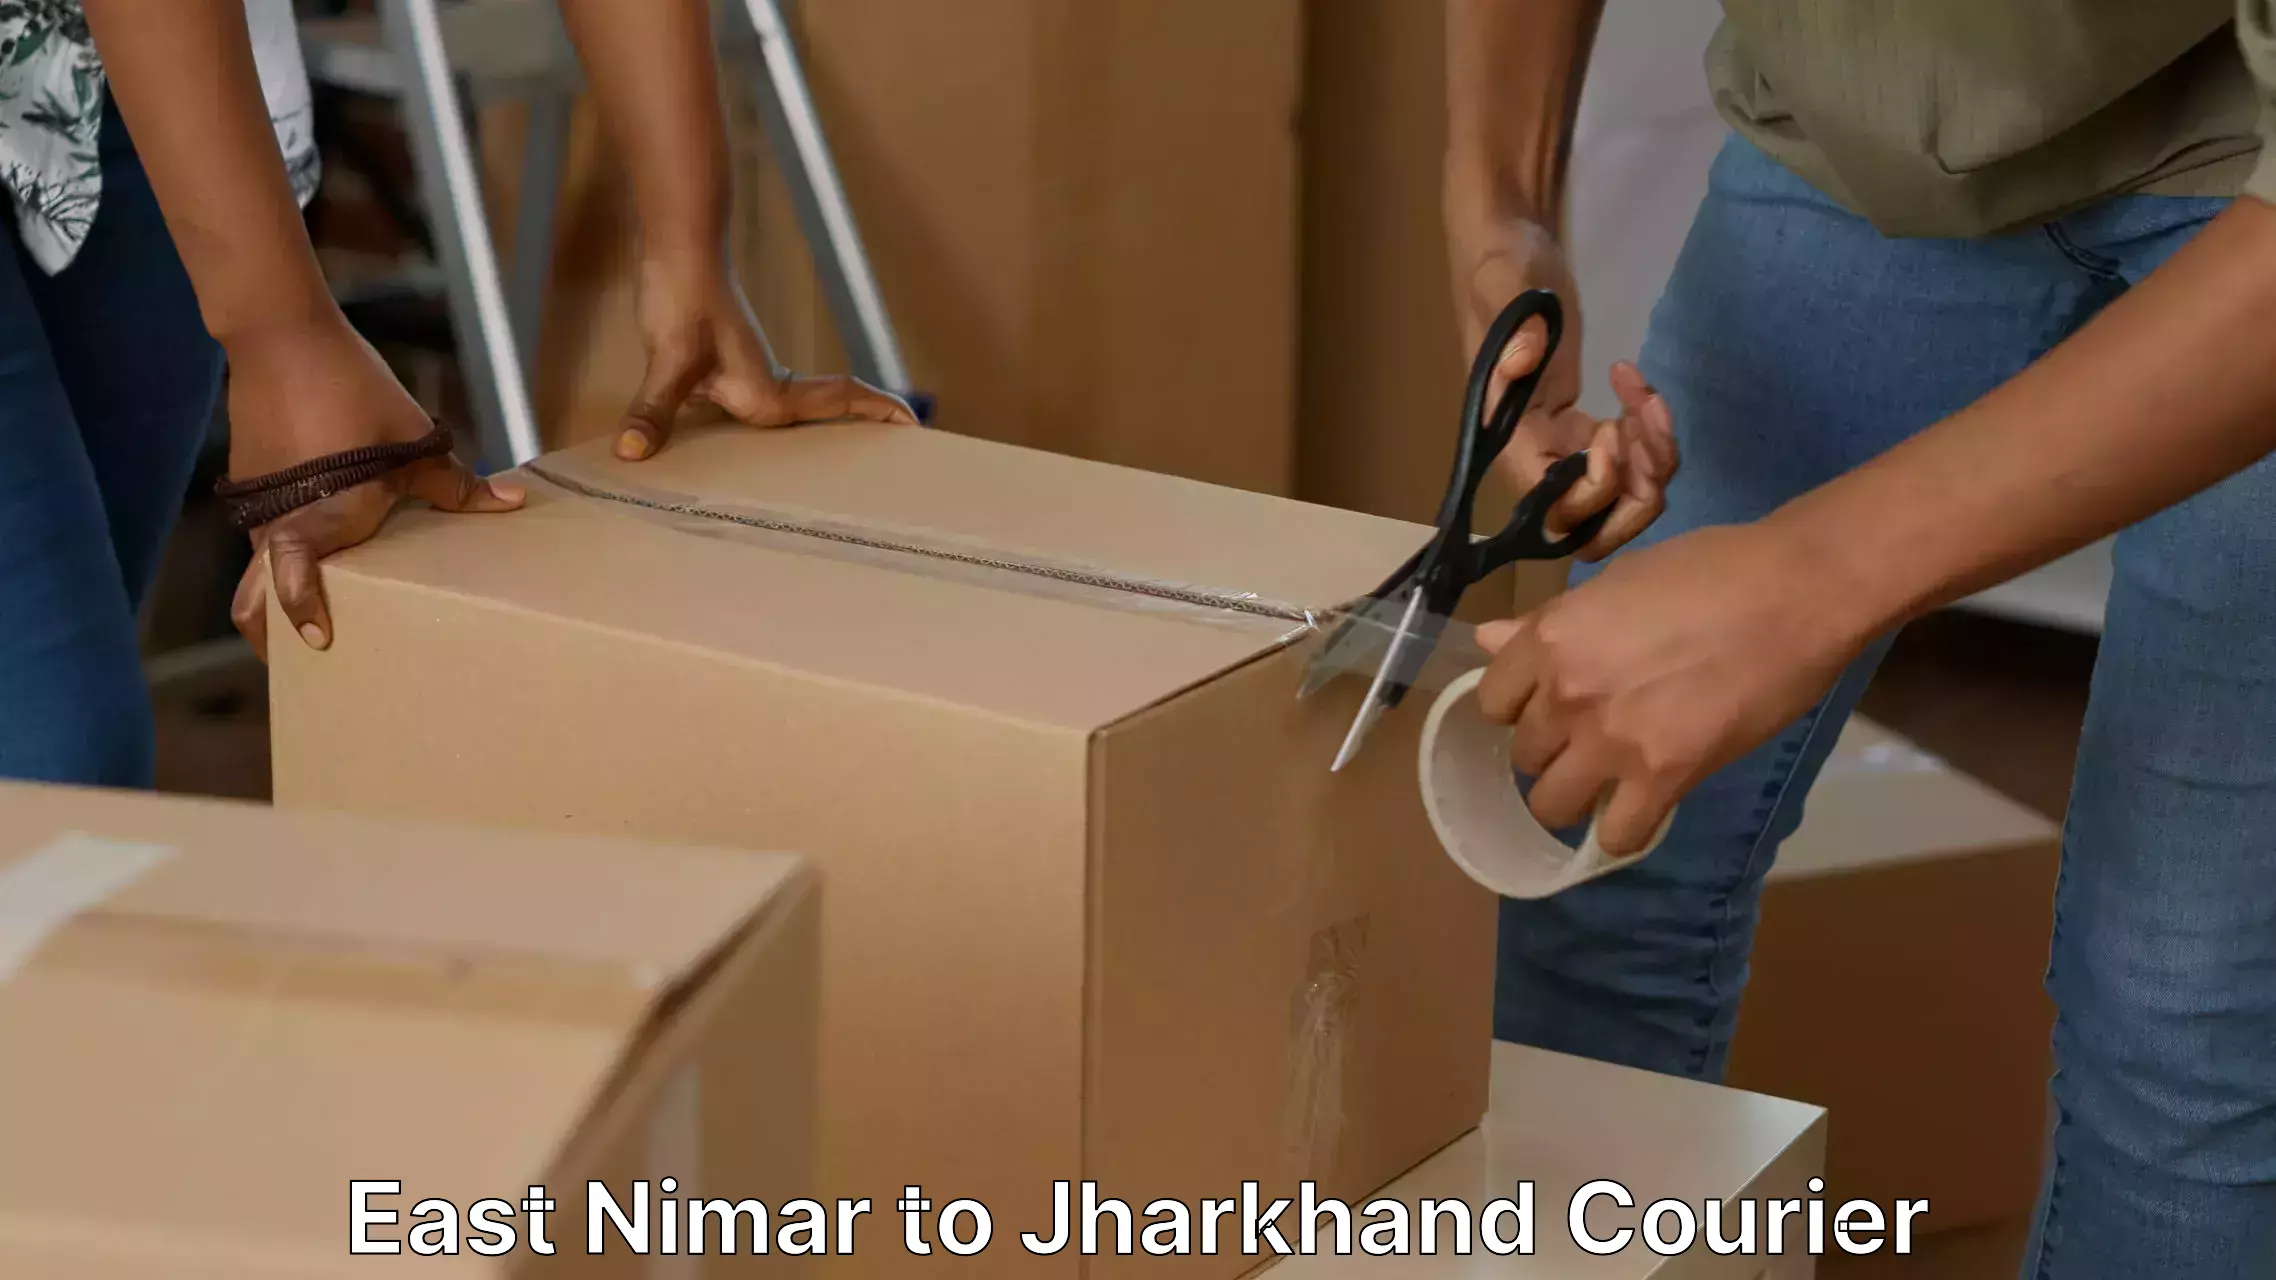 Household moving experts East Nimar to Jamshedpur